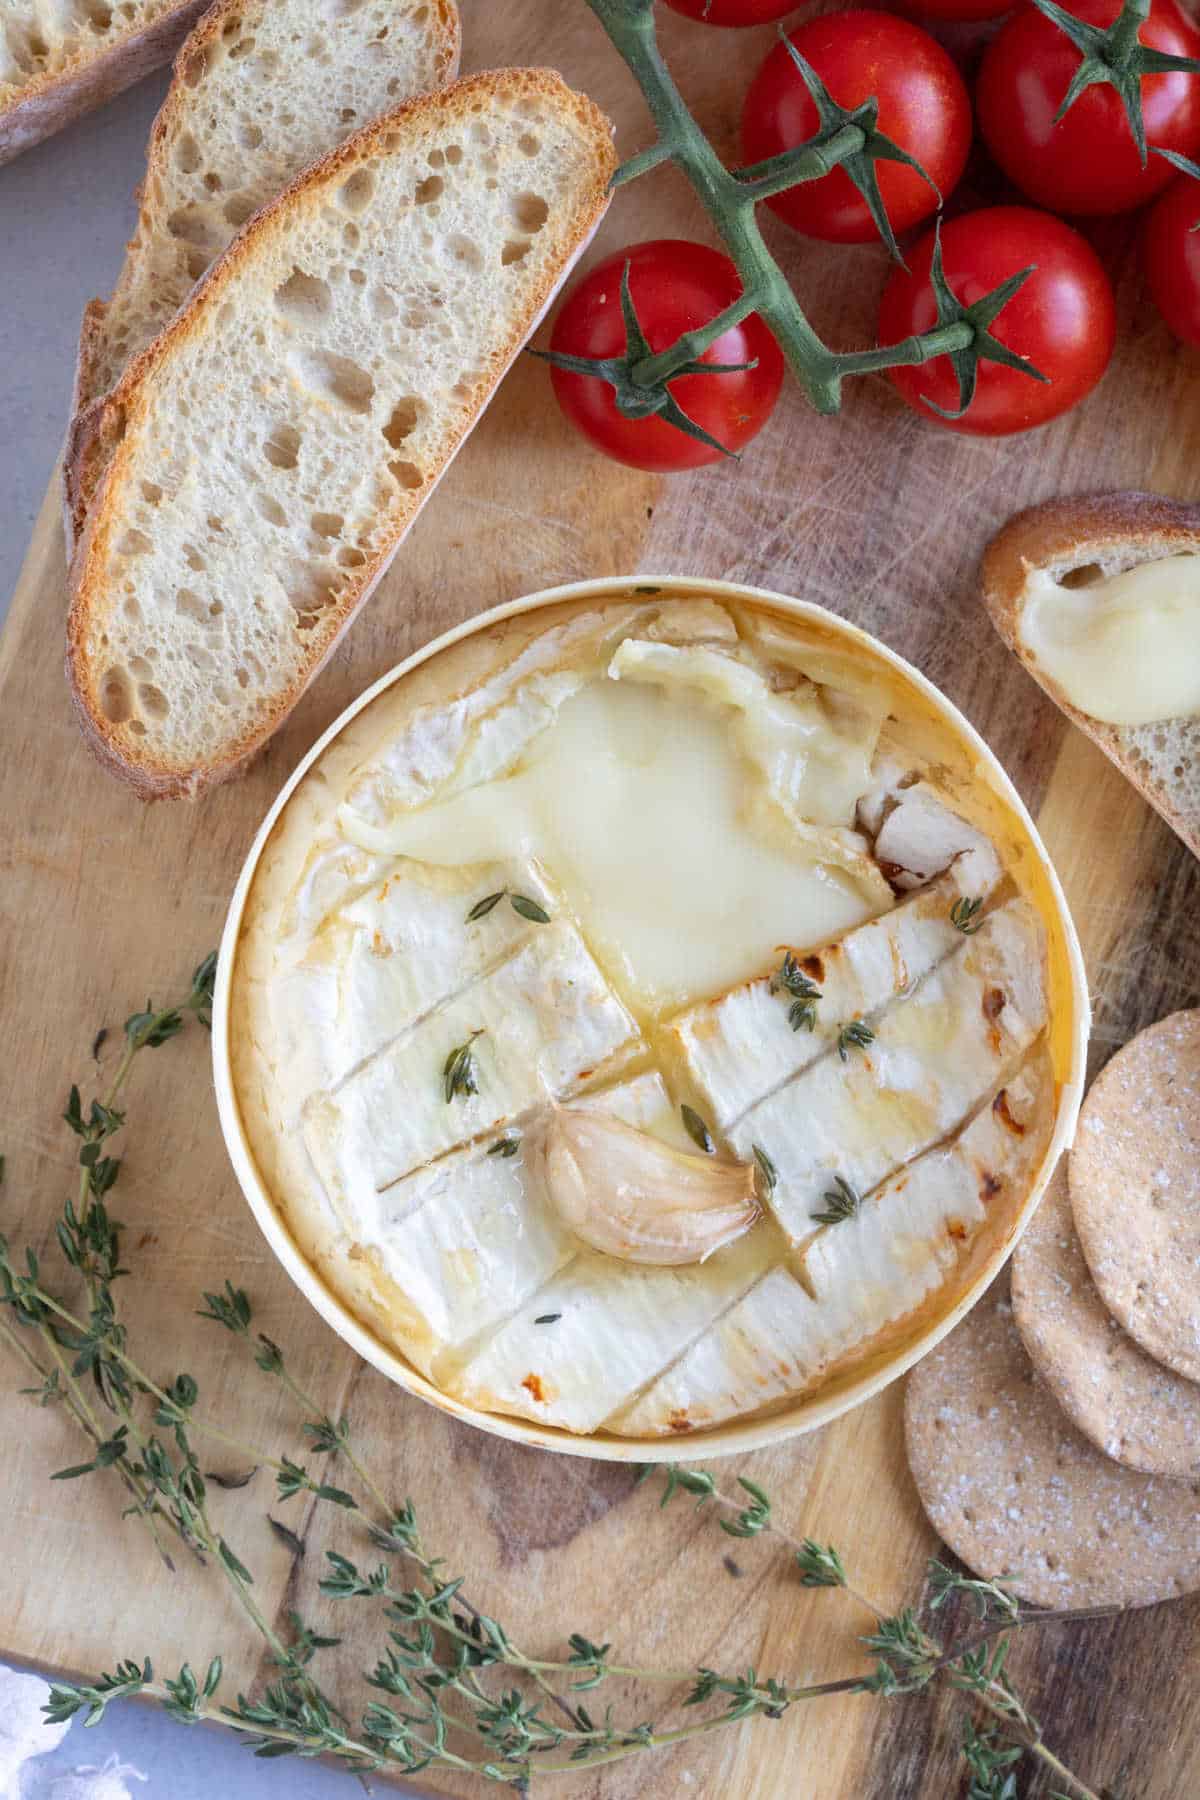 A baked camembert with slices of air fried baguette.